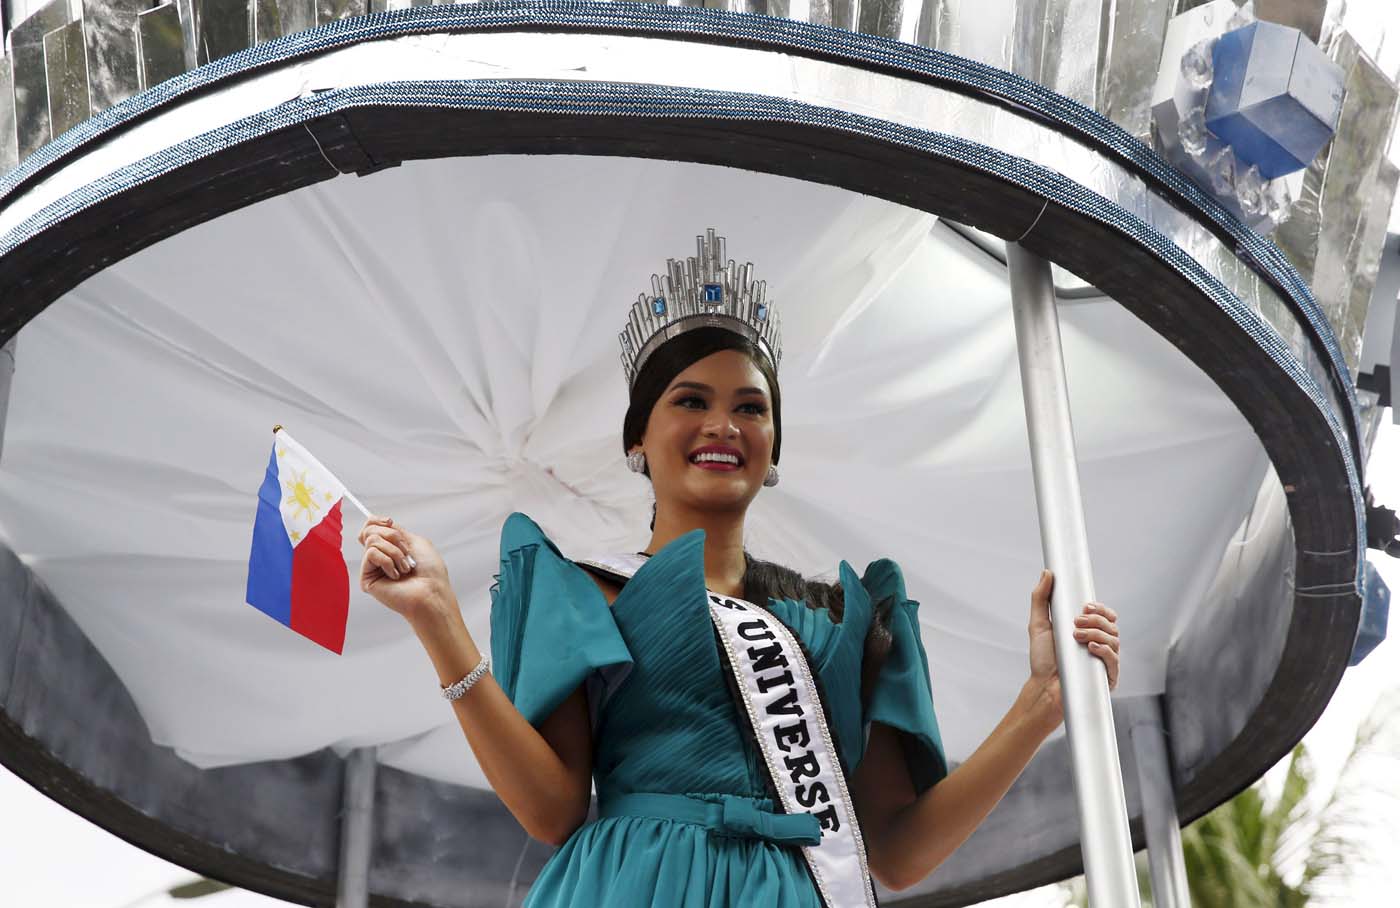 Miss Universe 2015 Pia Alonzo Wurtzbach holds a miniature Philippine flag during a motorcade in Manila, January 25, 2016. Wurtzbach, the first Miss Universe from the Philippines in more than four decades, said on Sunday she will spend her reign bringing awareness to issues like HIV and draw support for countries vulnerable to disasters. REUTERS/Erik De Castro